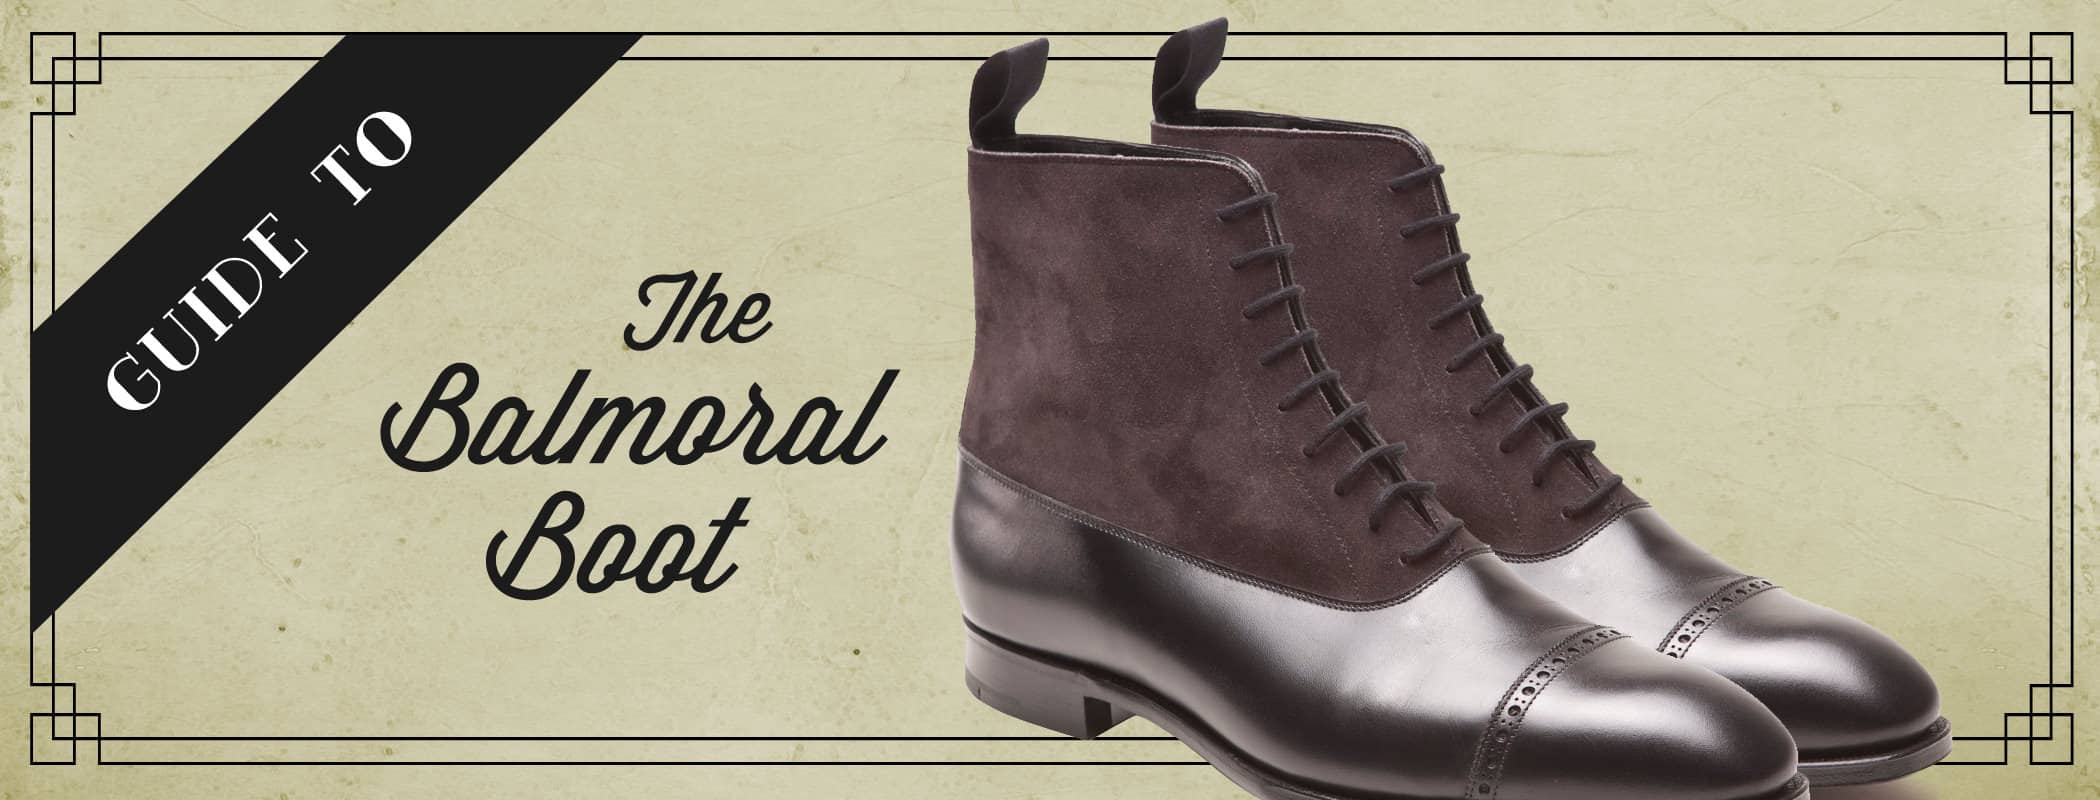 Balmoral Boots Guide